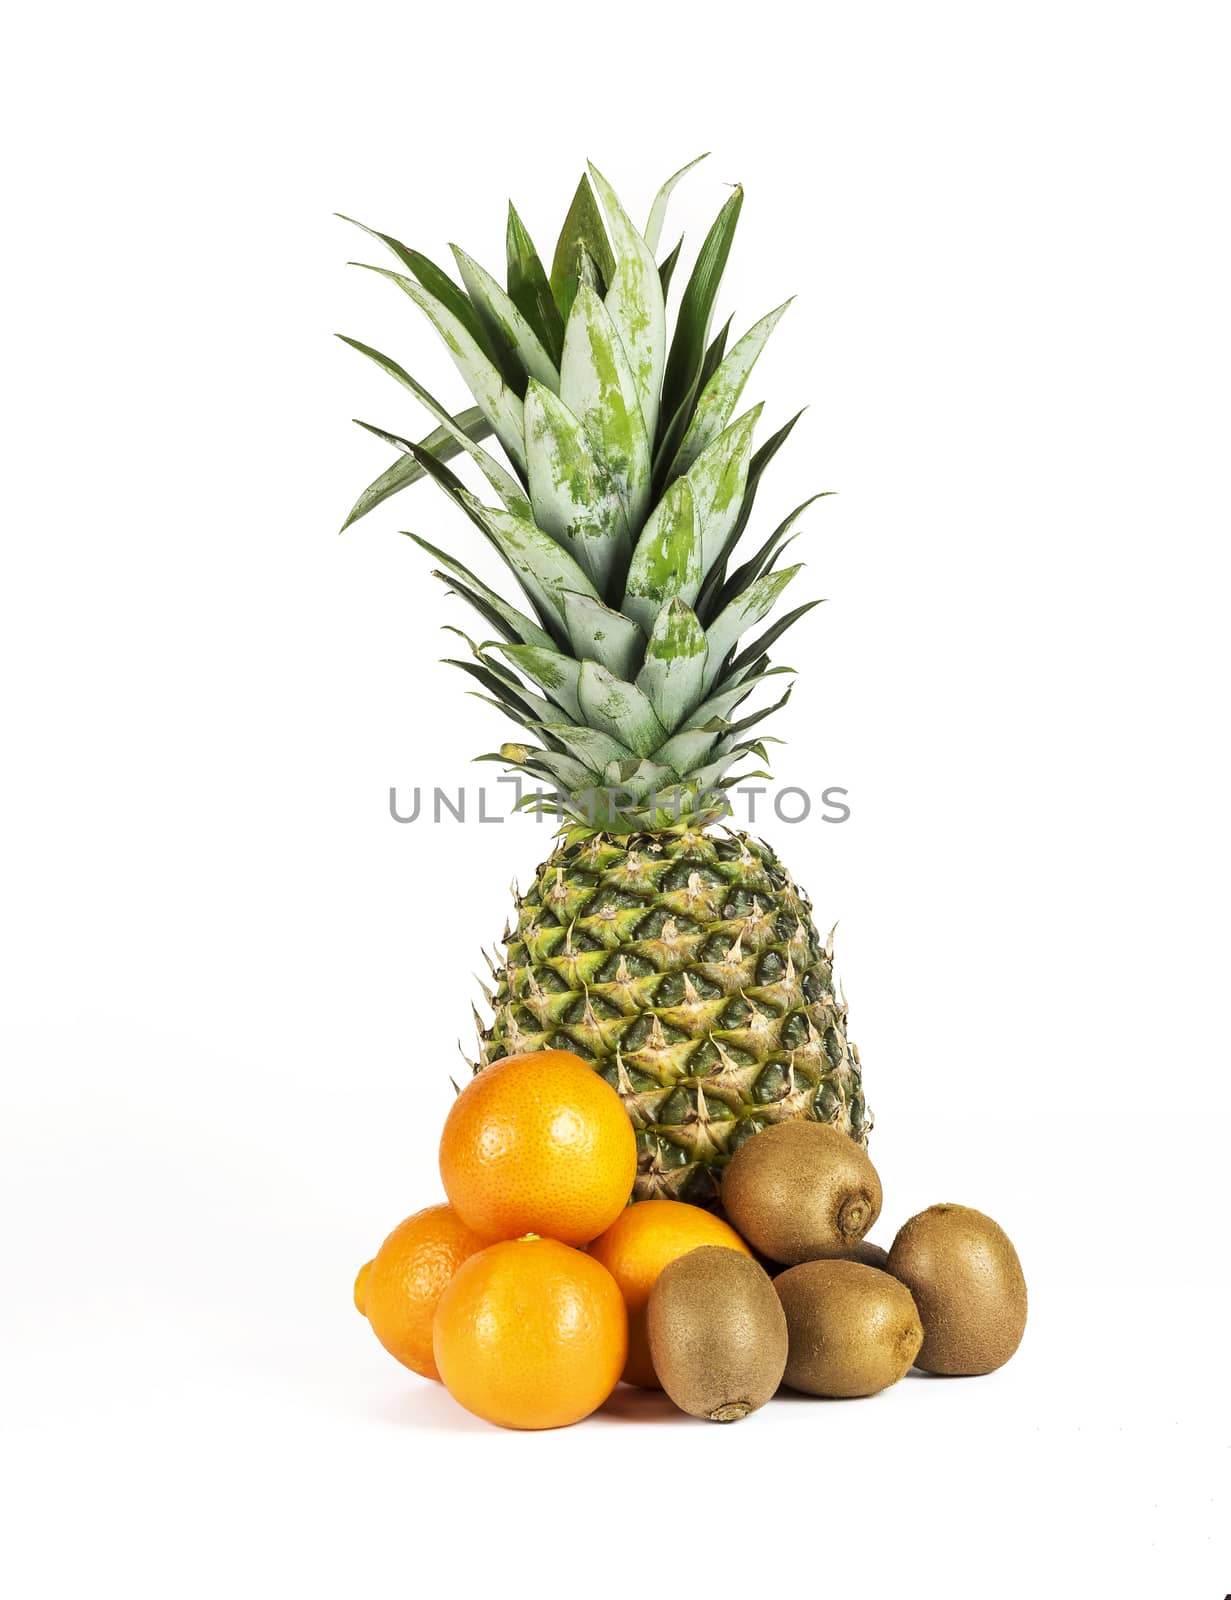 Tropical fruits lie group on a white background by Grommik